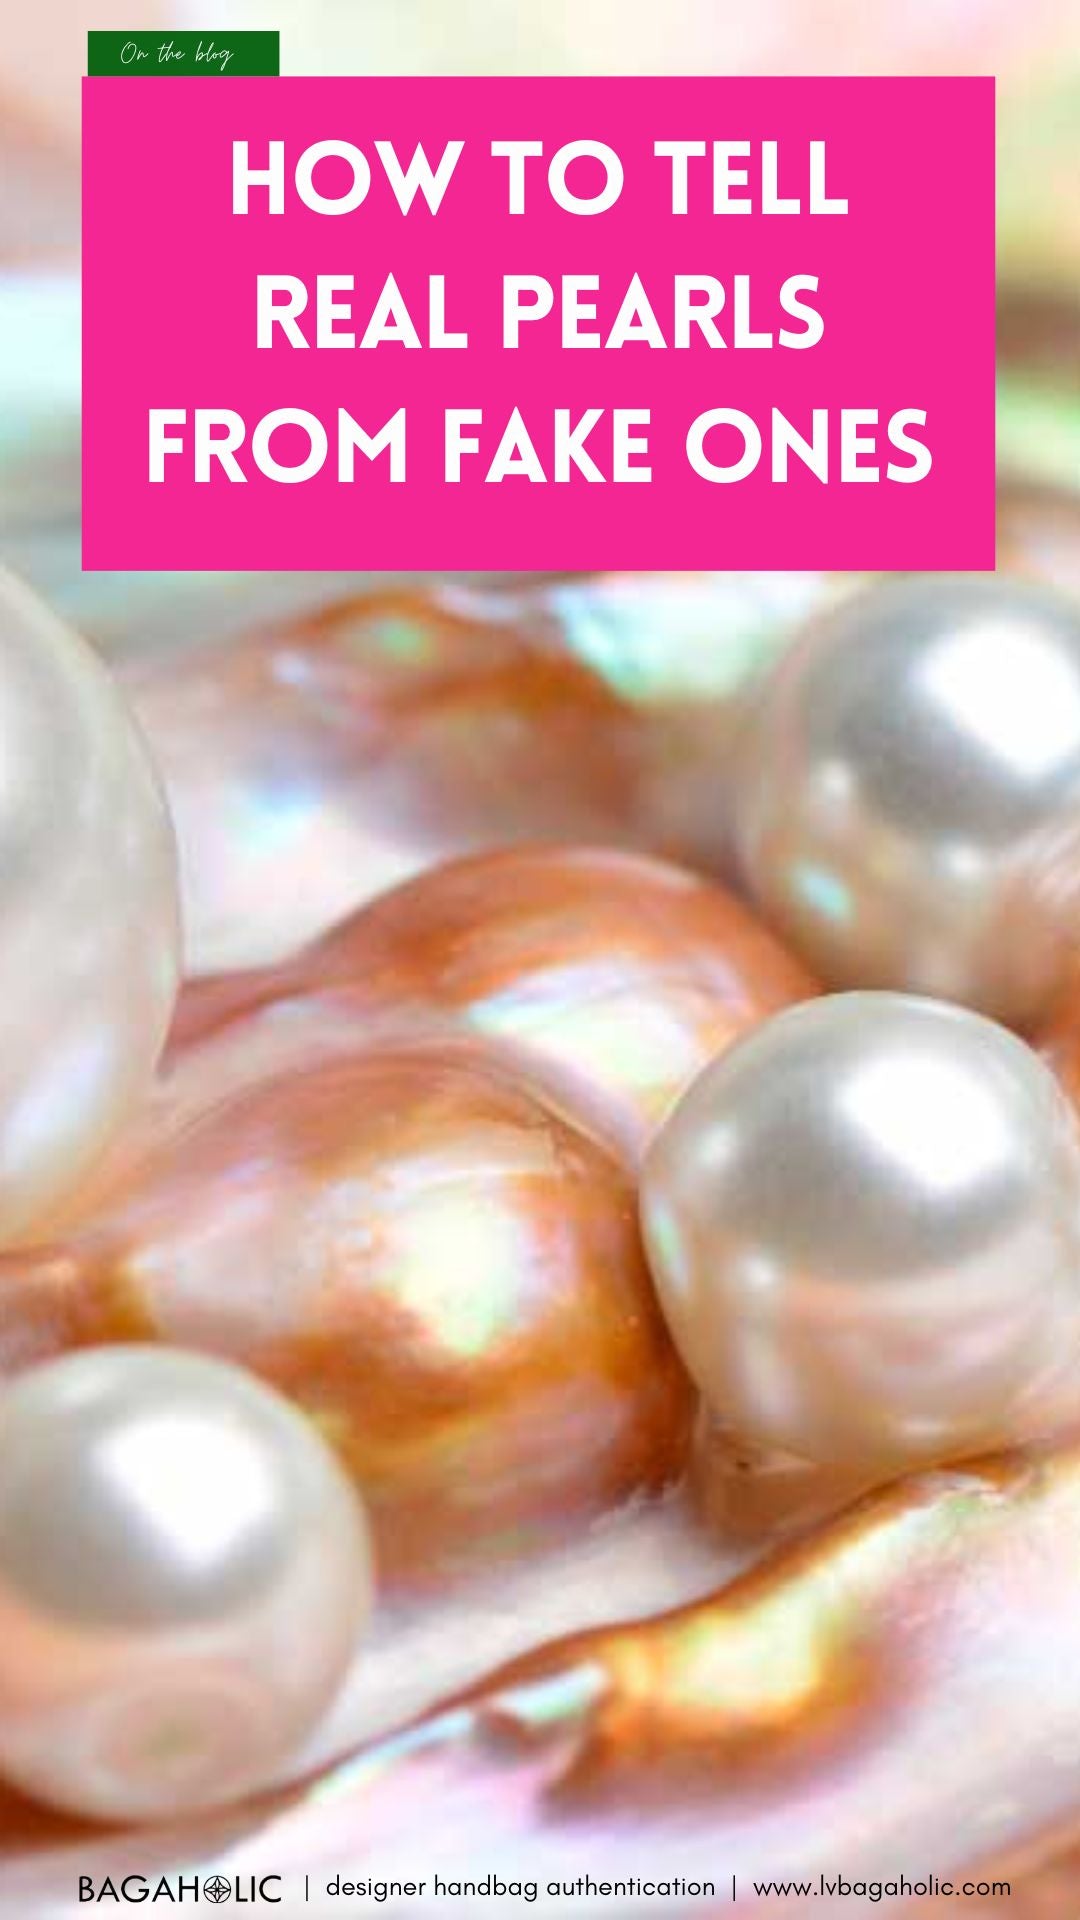 HOW TO TELL REAL PEARLS FROM FAKE ONES